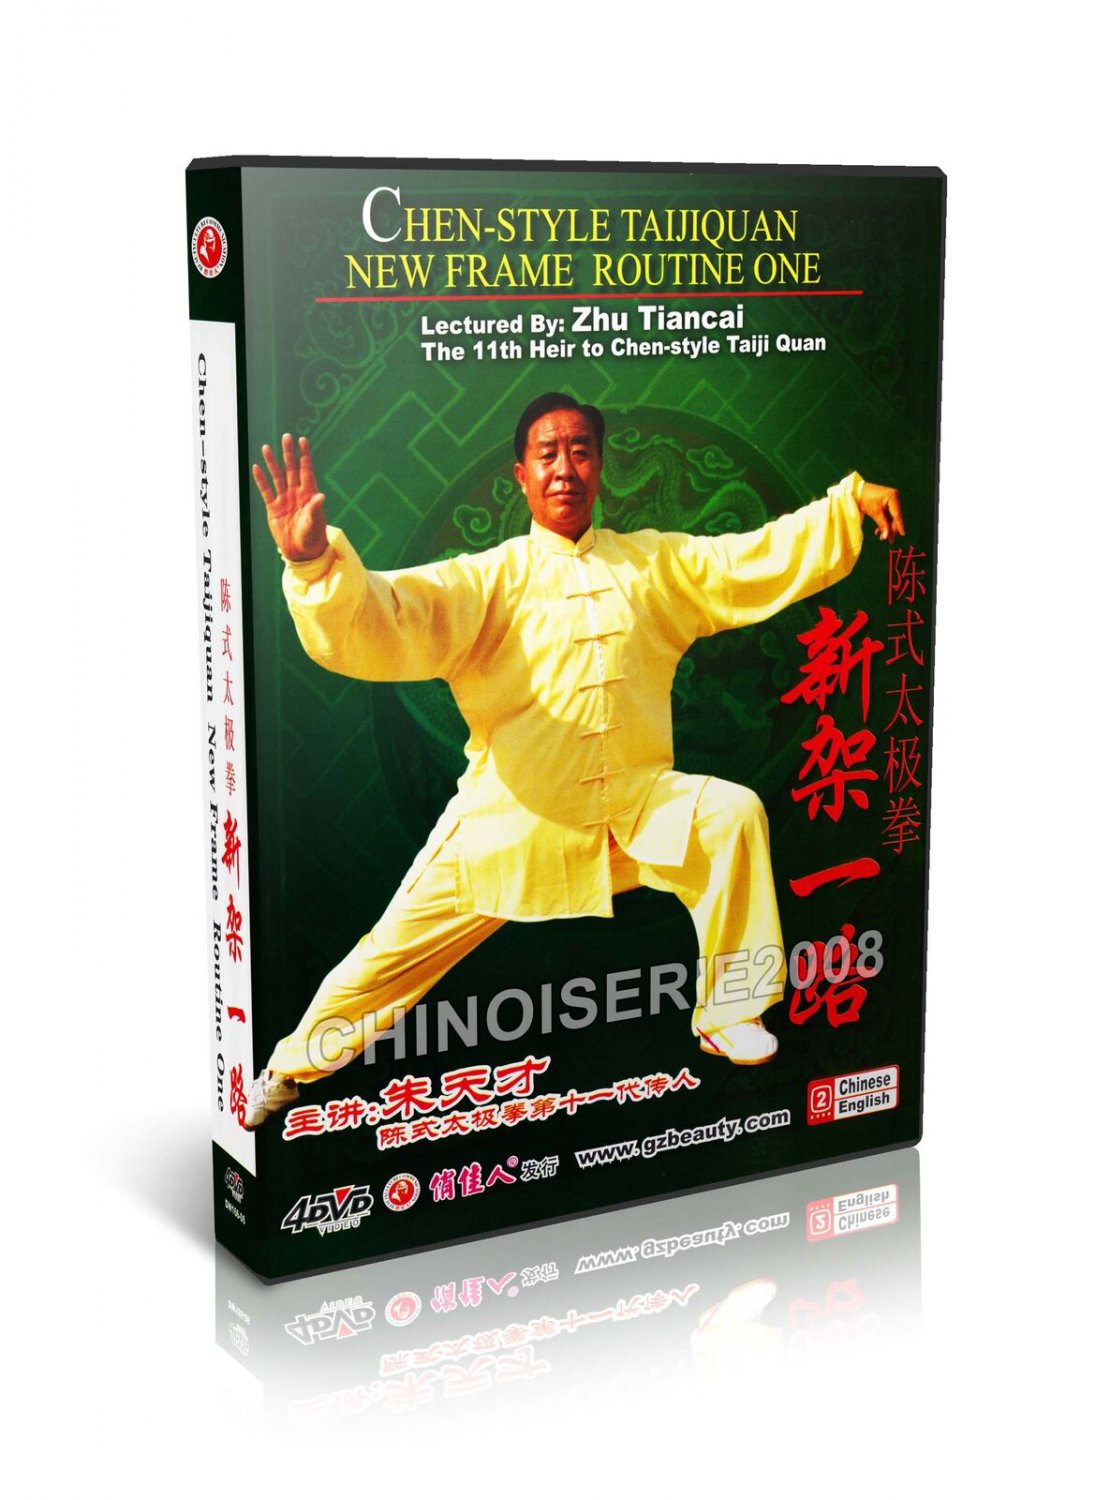 DW166-06 Chen Style Taijiquan - Chen Style Tai Chi New Frame I by Zhu Tiancai 4DVDs